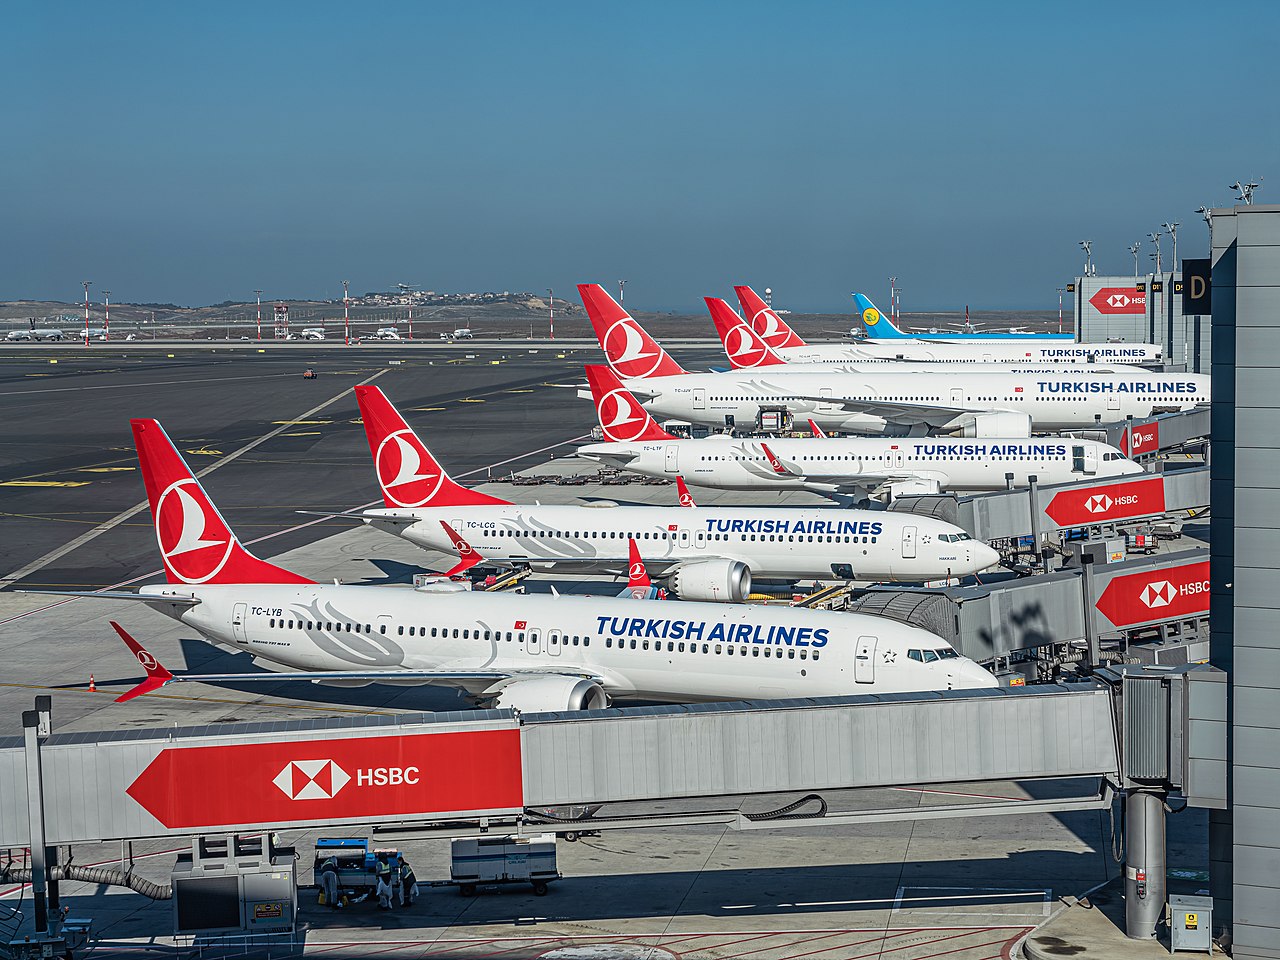 A line-up of parked aircraft at Turkey Istanbul airport